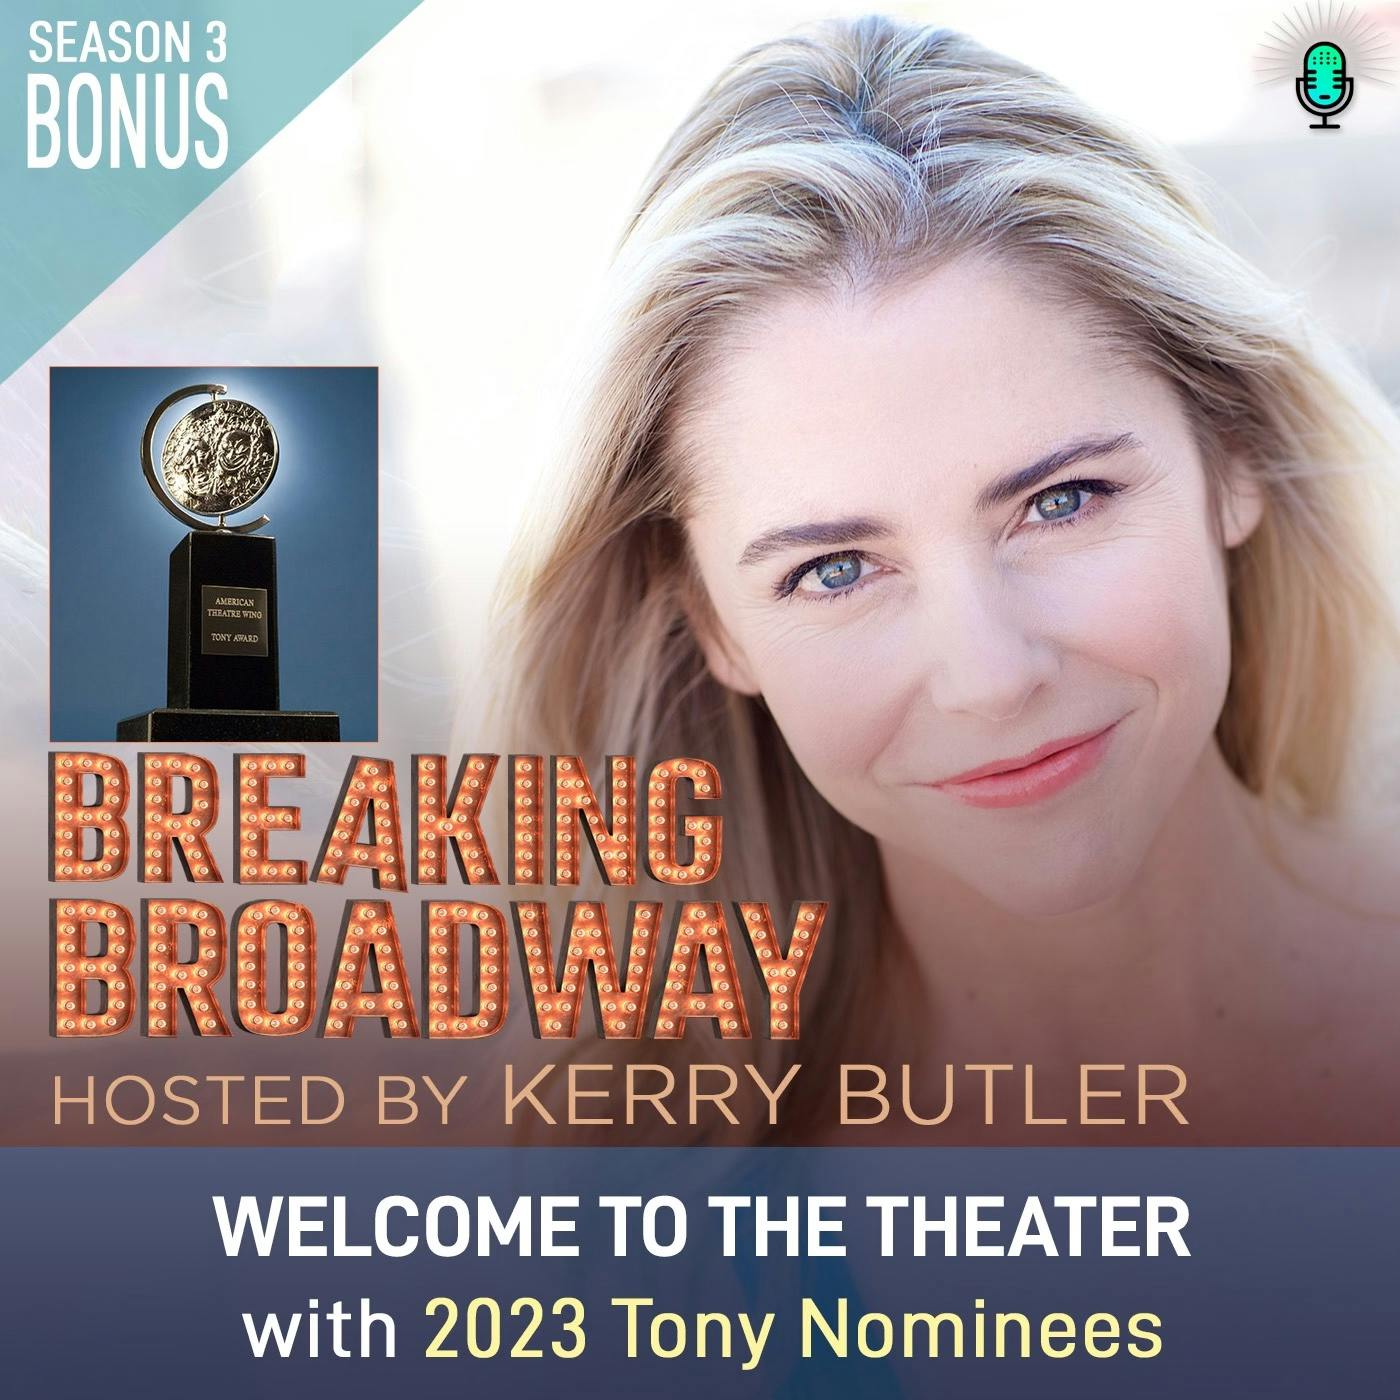 S3 BONUS - Welcome to the Theater, with 2023 Tony Nominees